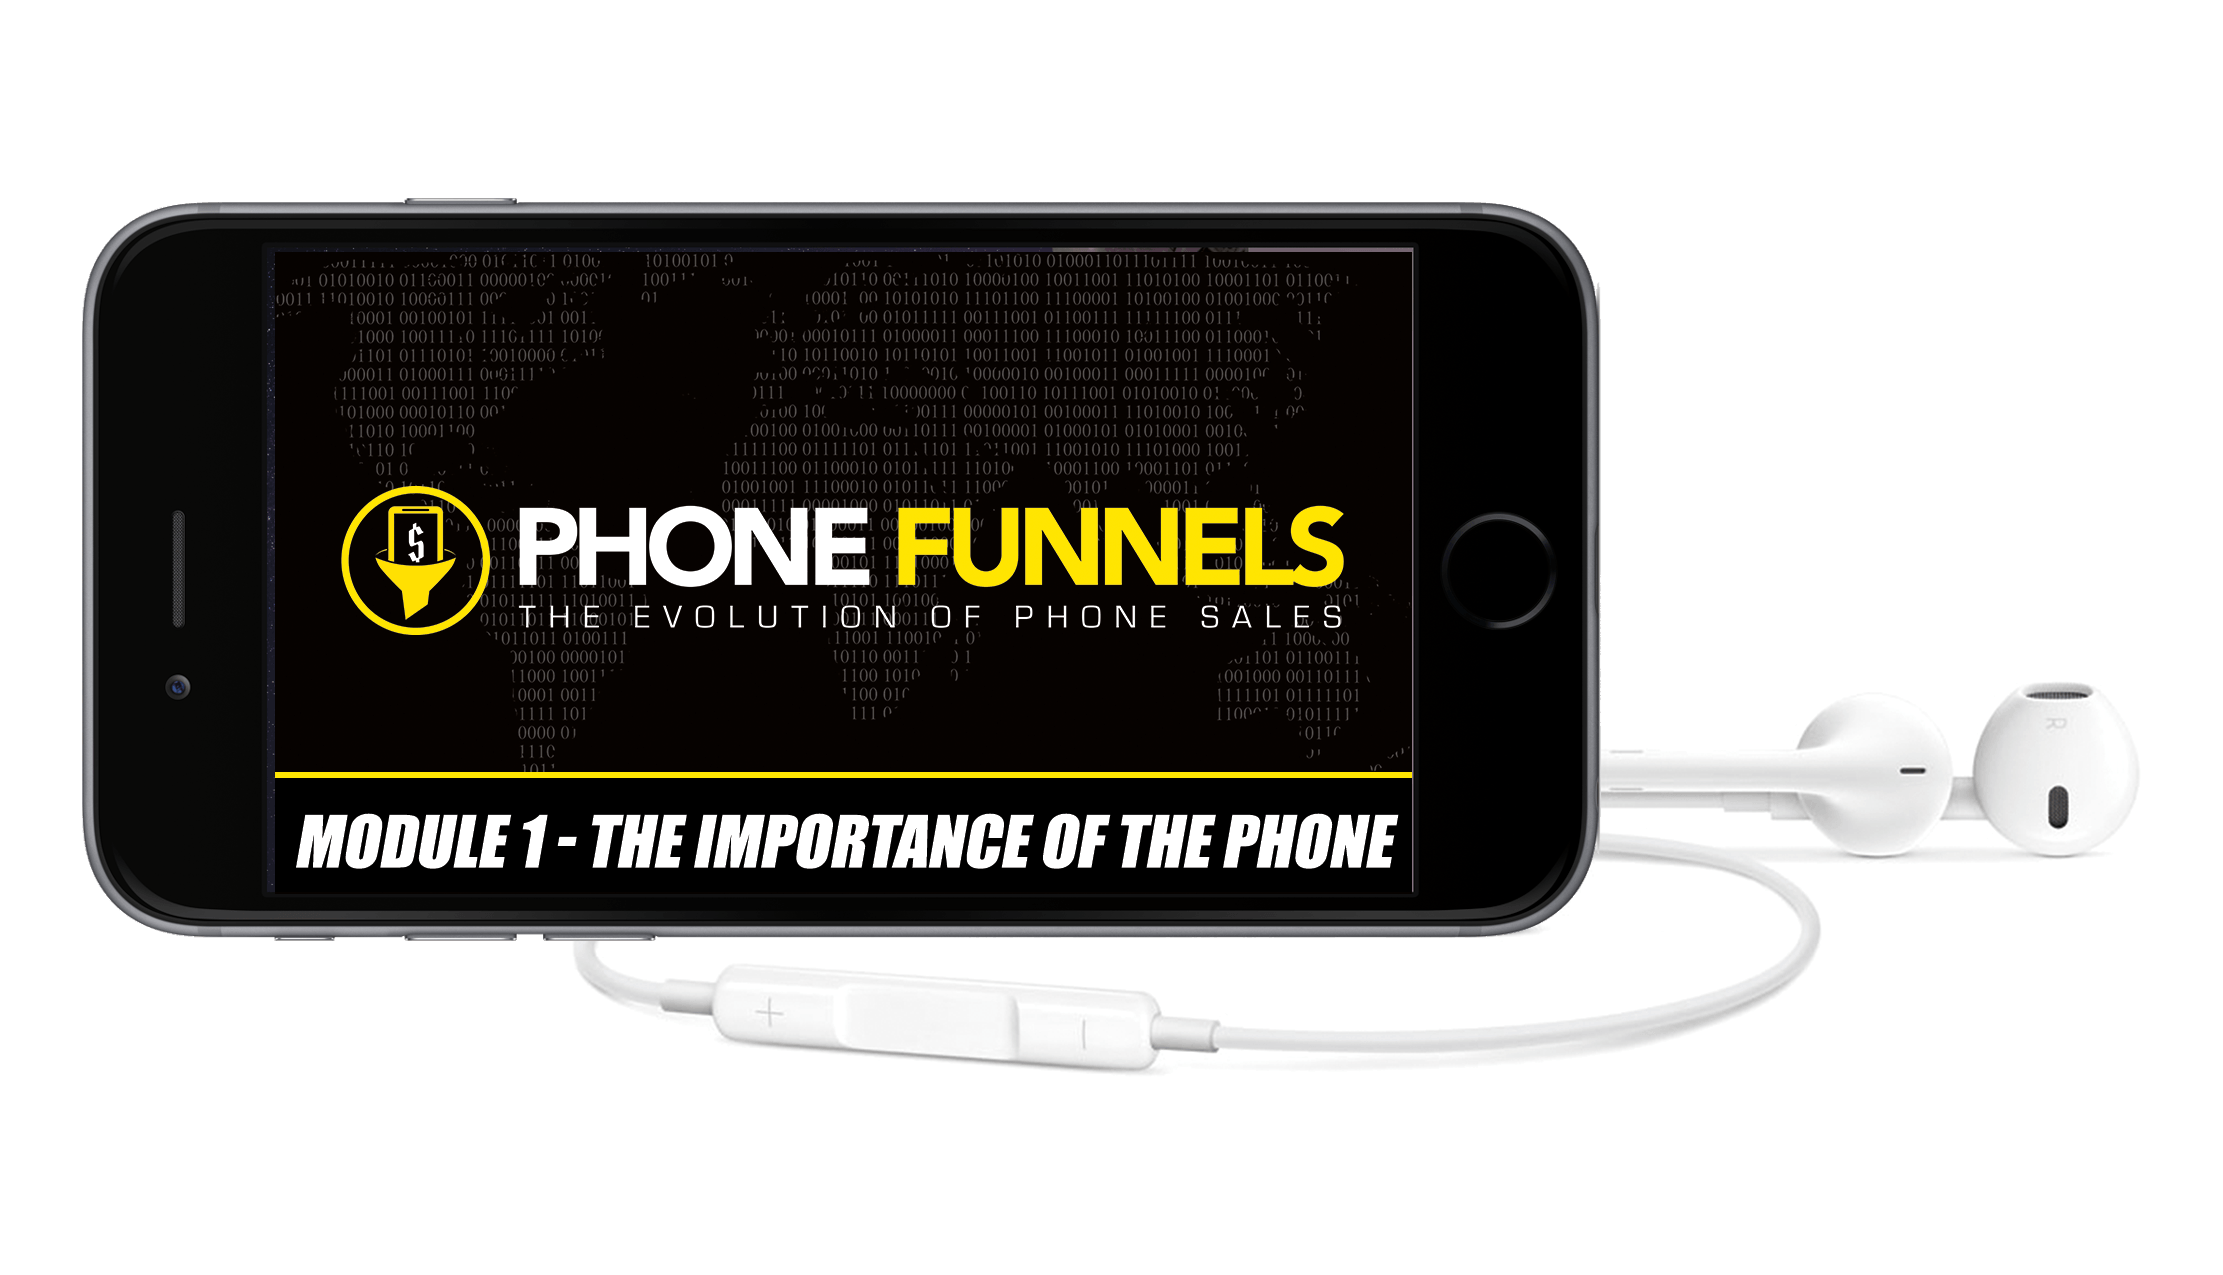 Ryan Stewman - Phone Funnels - The Evolution of Phone Sales